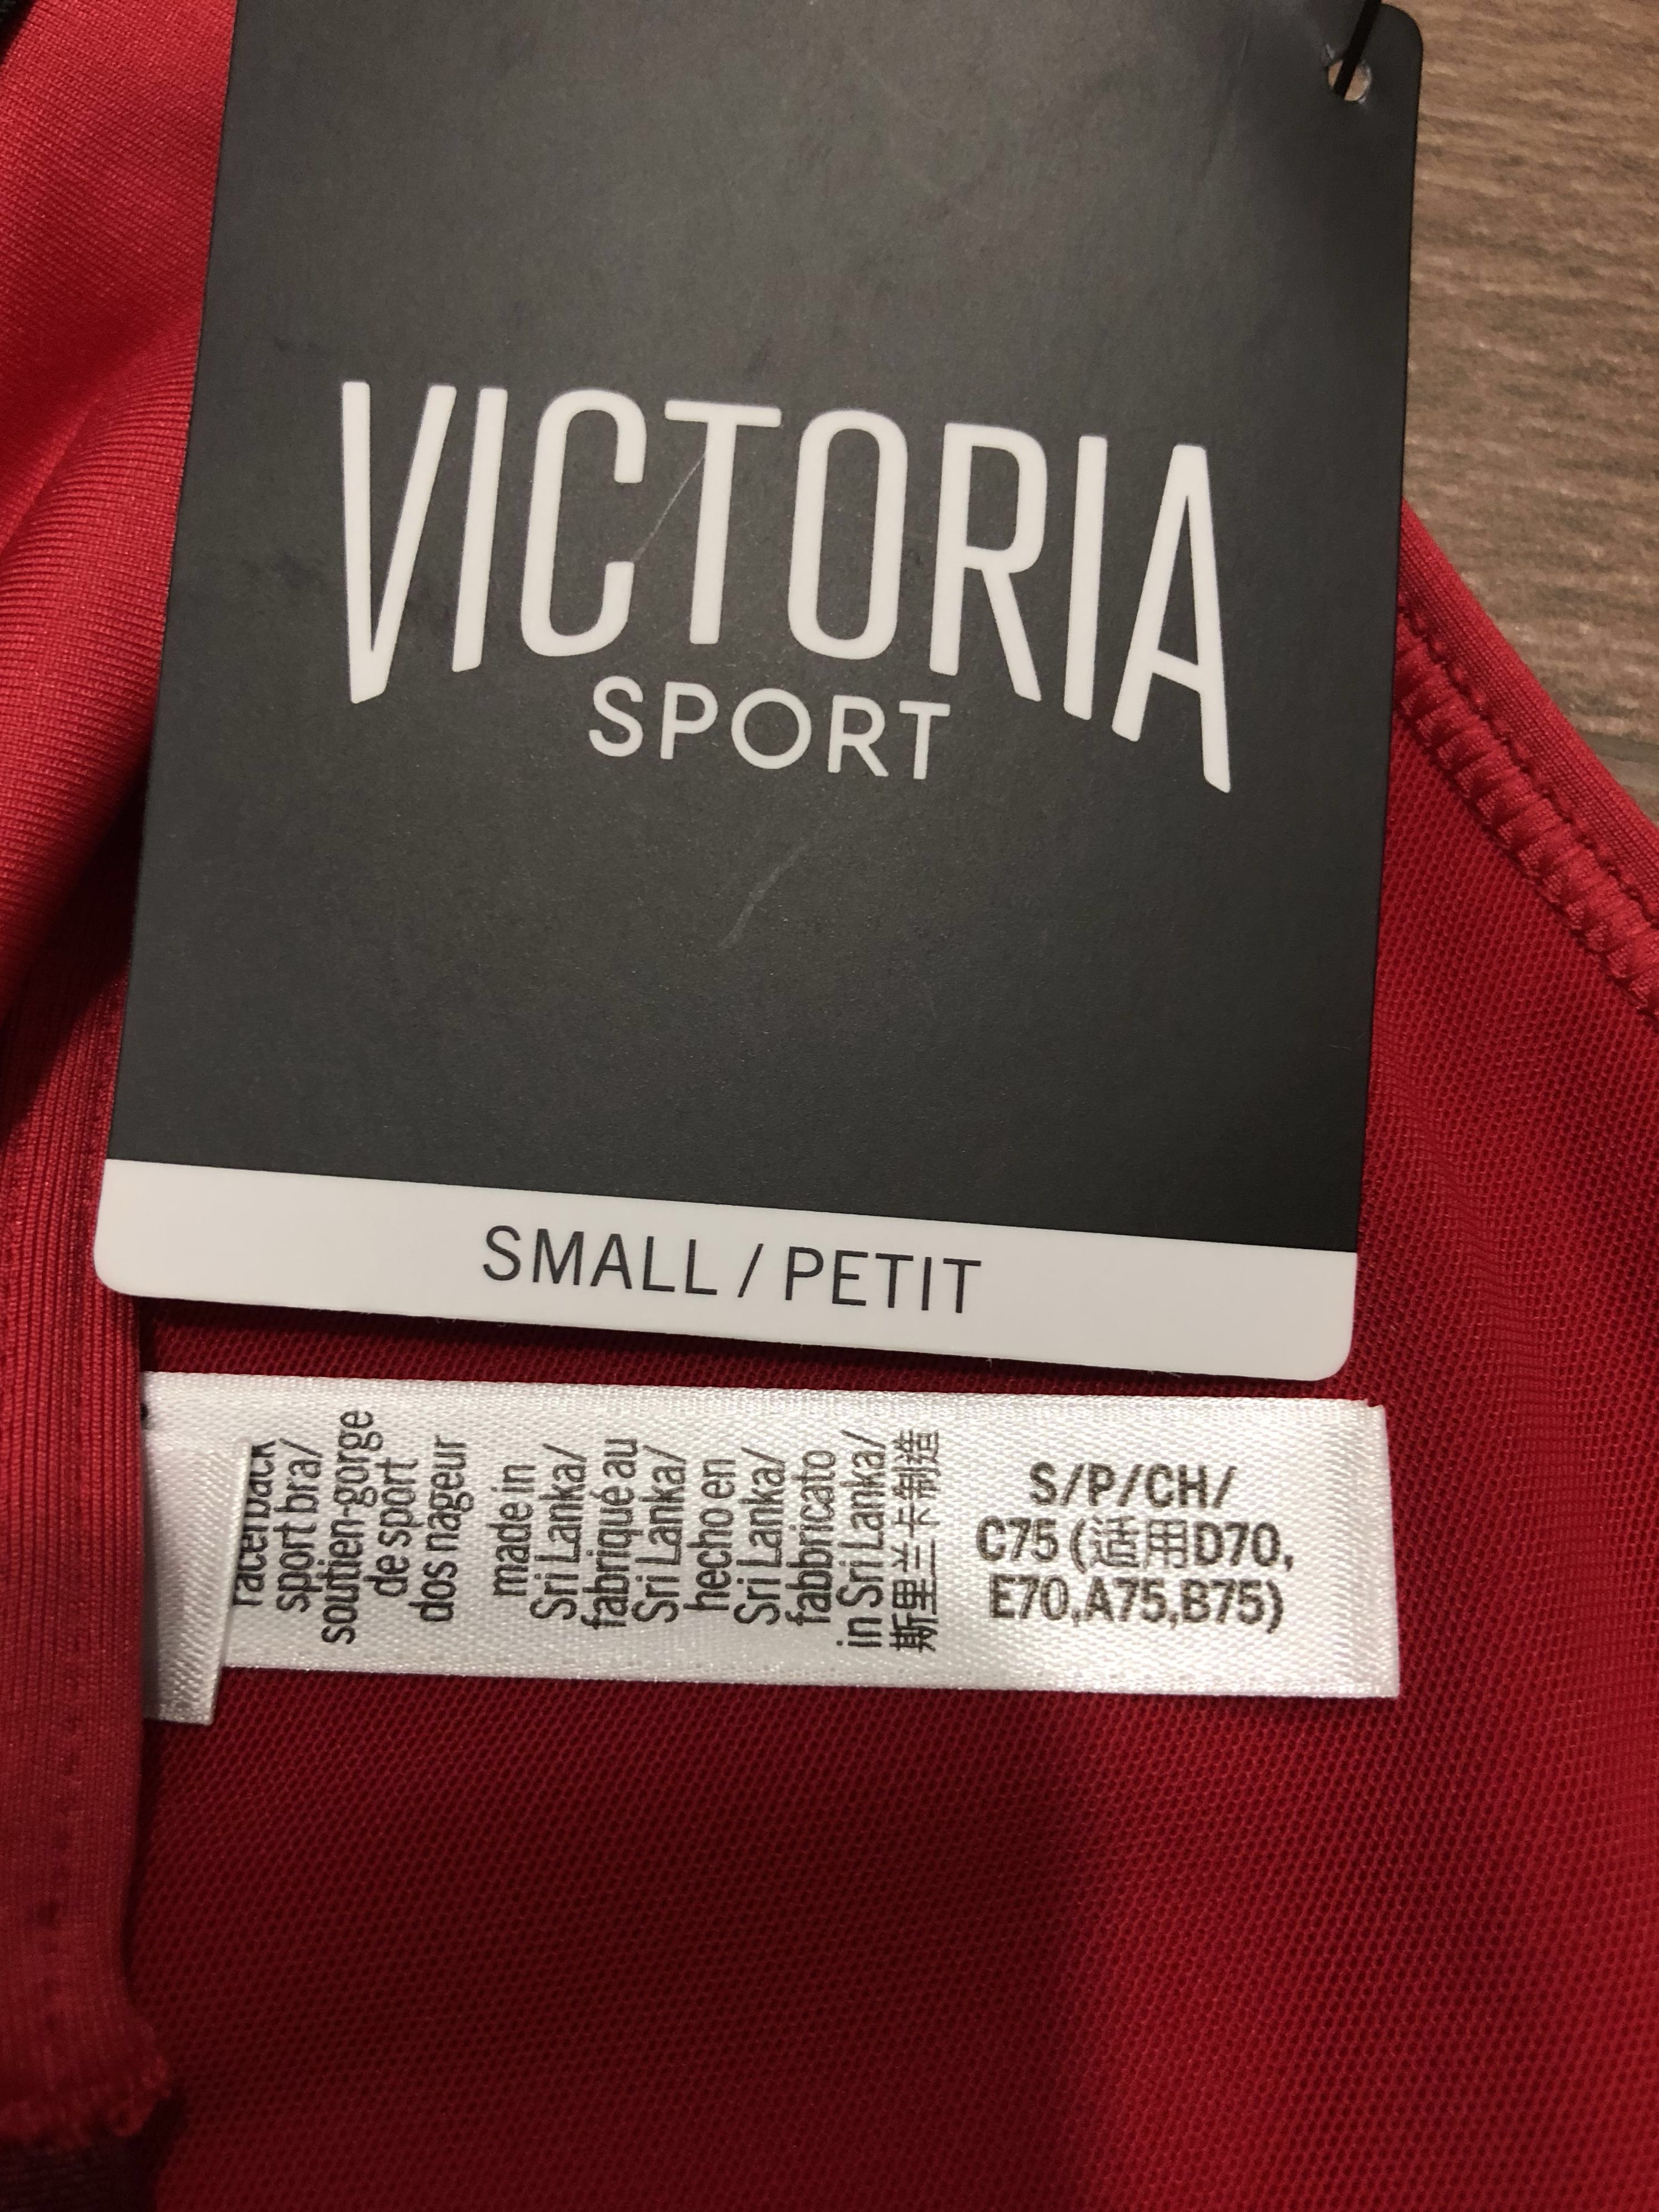 ❎BNWT Victoria's Secret The Player Racerback Strappy Red Sports Bra,  Women's Fashion, Activewear on Carousell